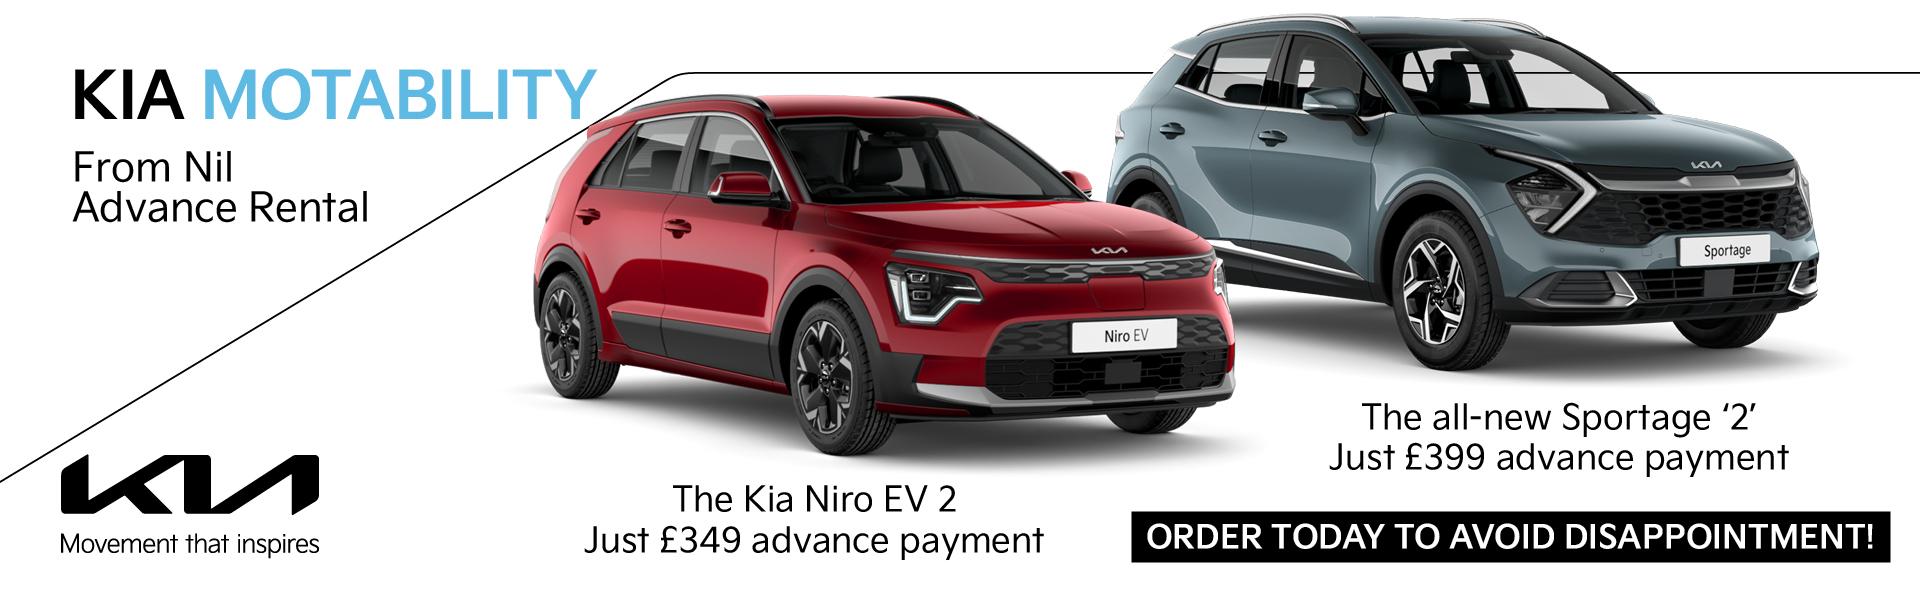 Kia Motability, from Nil Advance Rental. The Kia Stonic DCT Nil advance payment. The all-new Sportage '2' Just £499 advance payment. Order today to avoid disappointment!